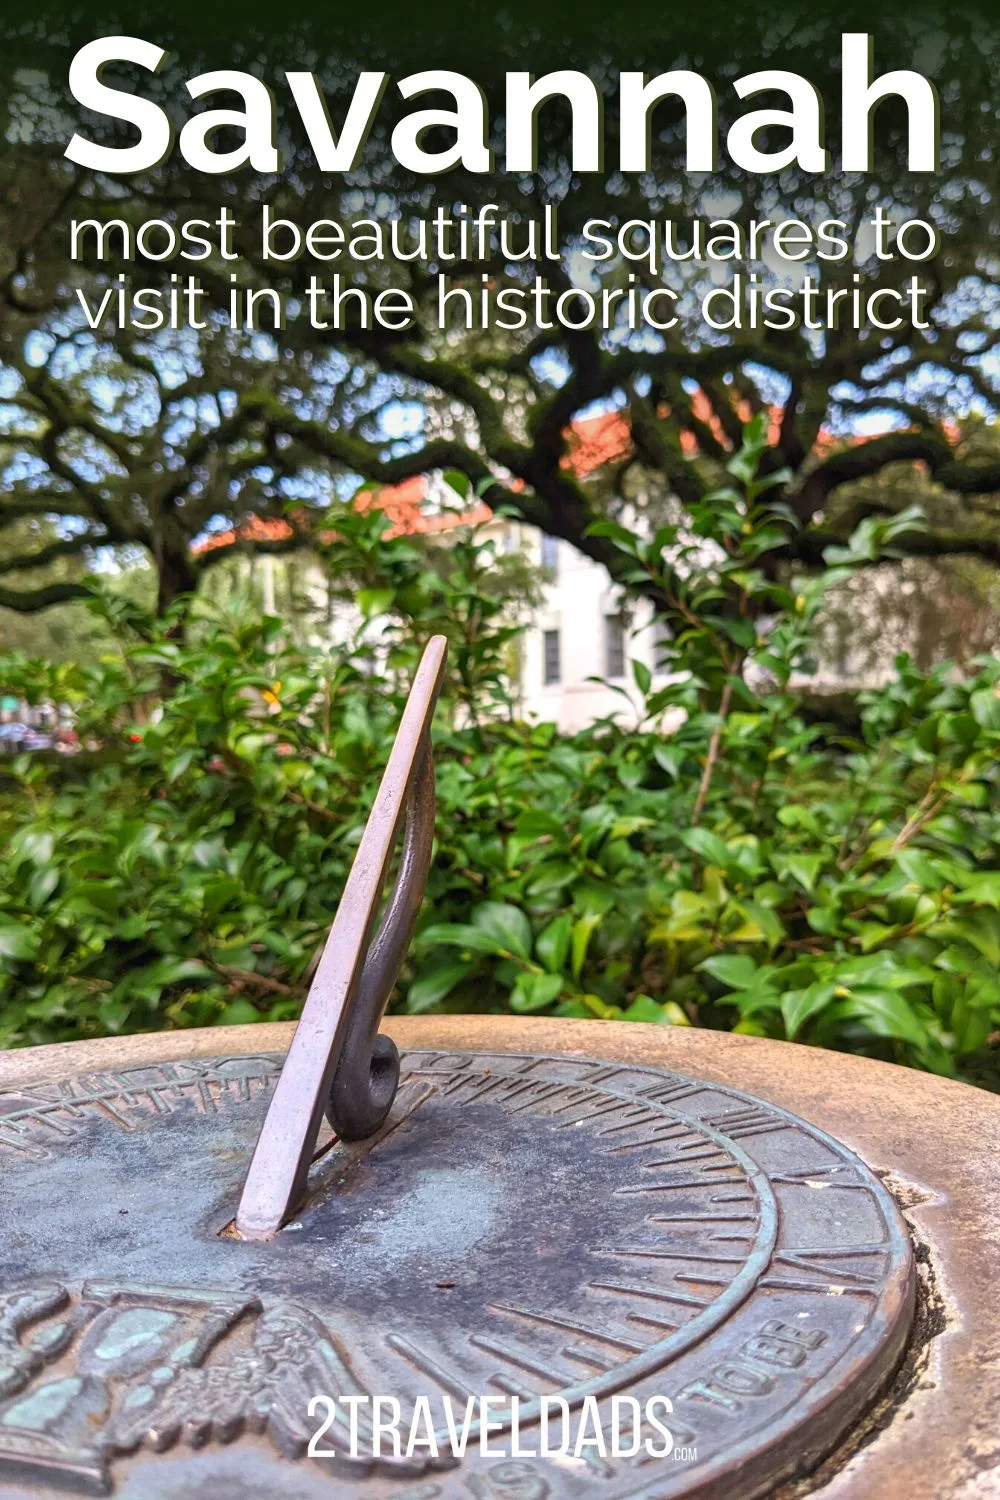 The best squares in Savannah are found in the Historic District, just steps from the riverfront. We've picked our favorite, most beautiful squares. Quiet parks, gardens, monuments and historic sites make visiting Savannah's squares a must-do when you visit.